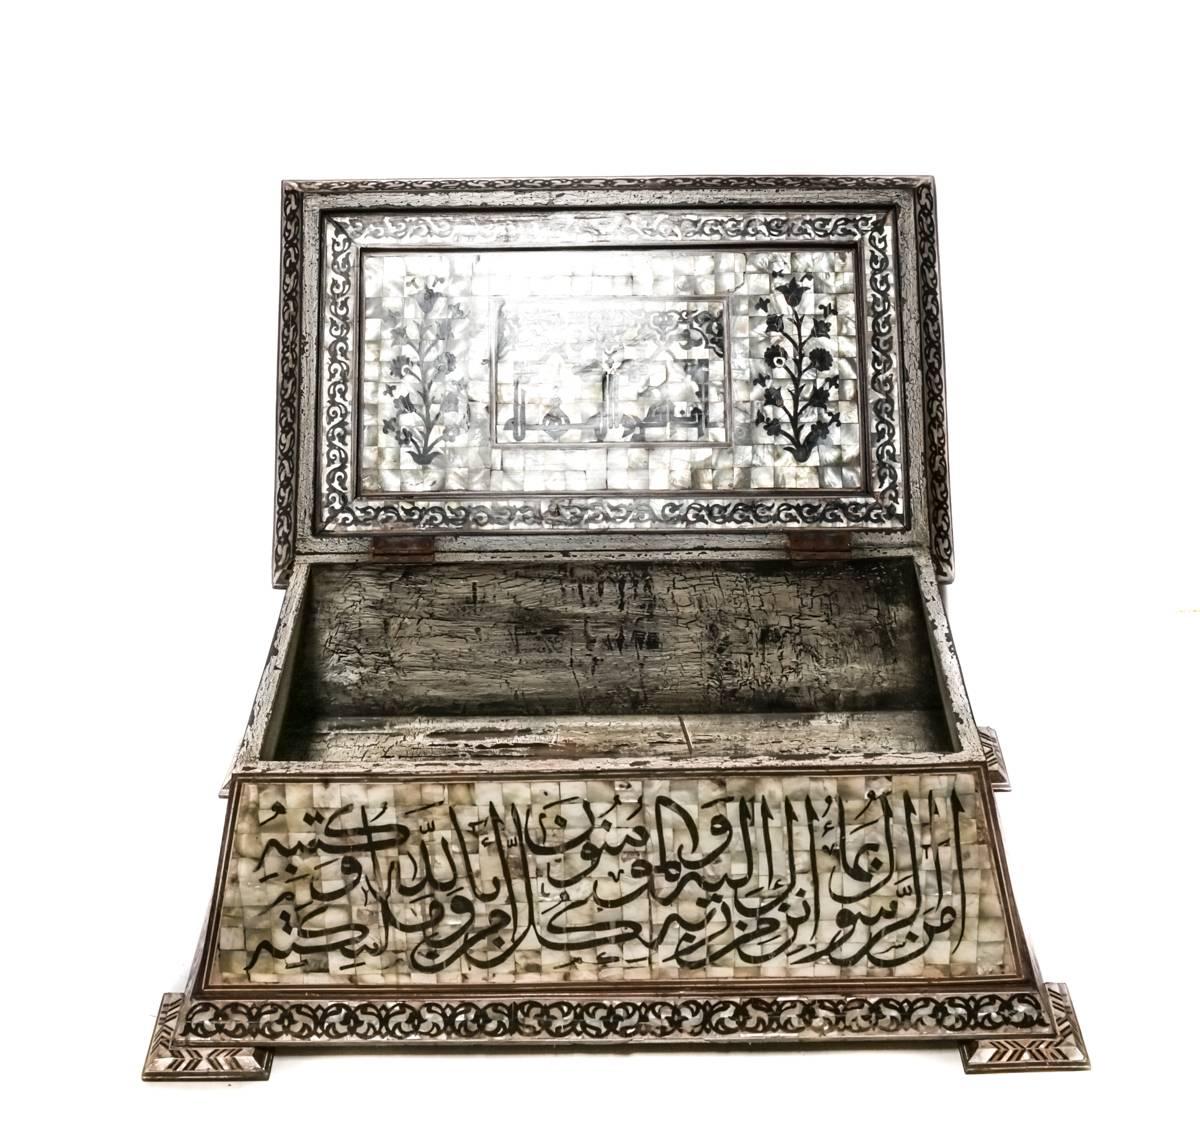 An extremely rare and very fine late 18th or early 19th century chest, trunk or large casket from Turkey, probably Istanbul. This large chest features extraordinary all over paneled mother of pearl, inlaid with magnificent ebony wood calligraphy in